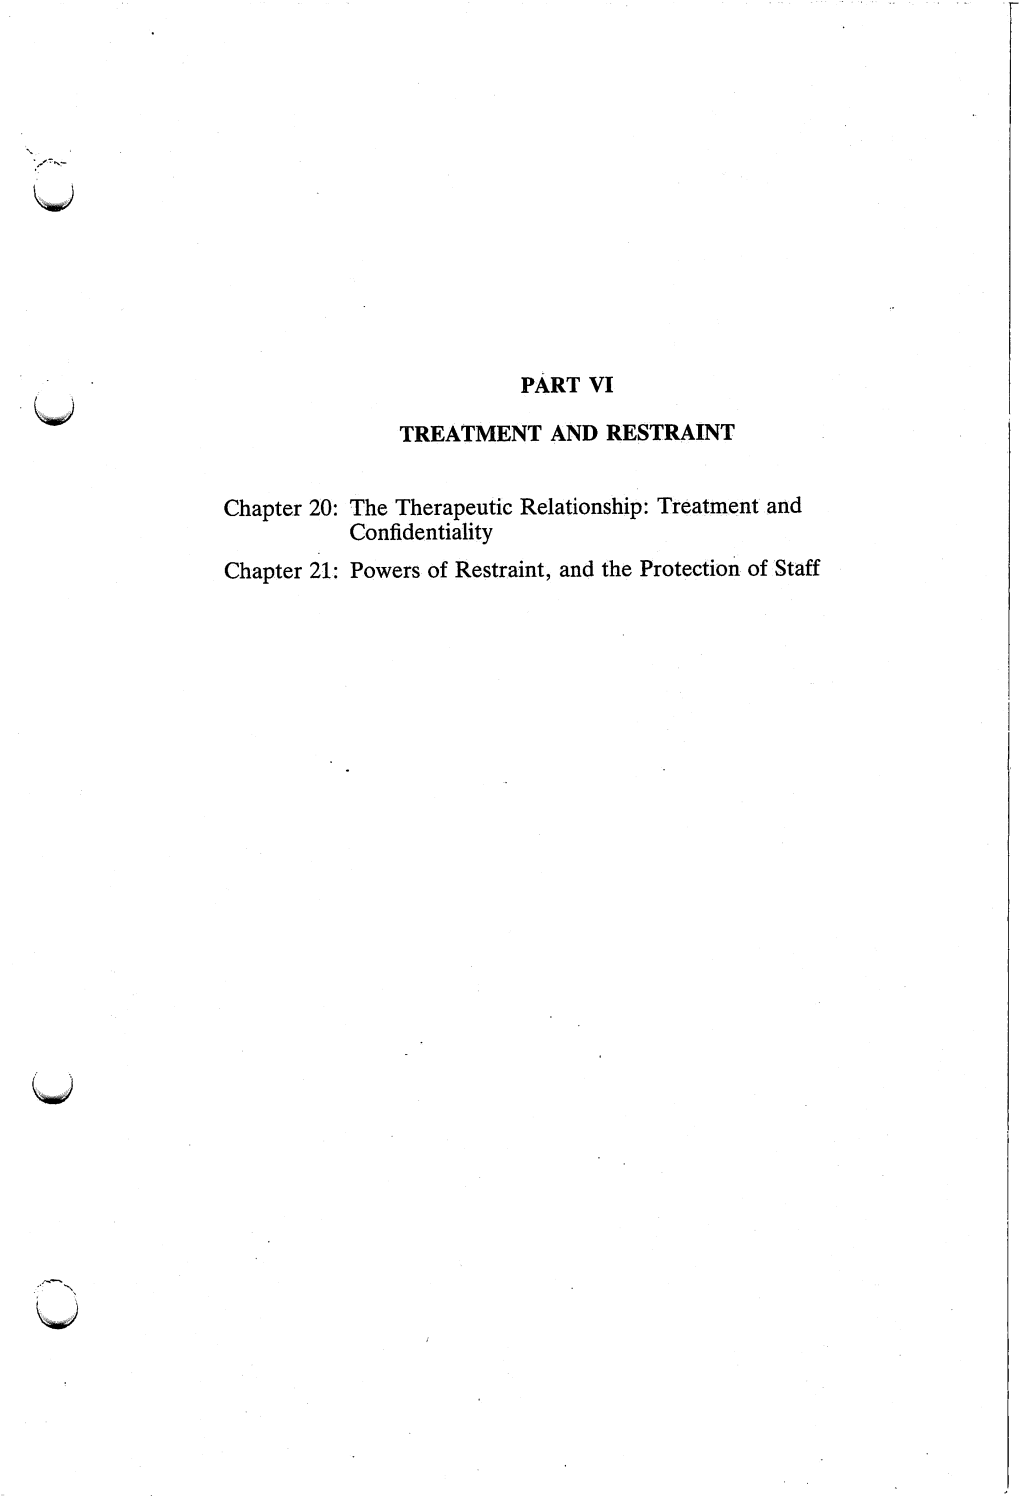 Chapter 20: the Therapeutic Relationship: Treatment and Confidentiality Chapter 21: Powers of Restraint, and the Protection of Staff